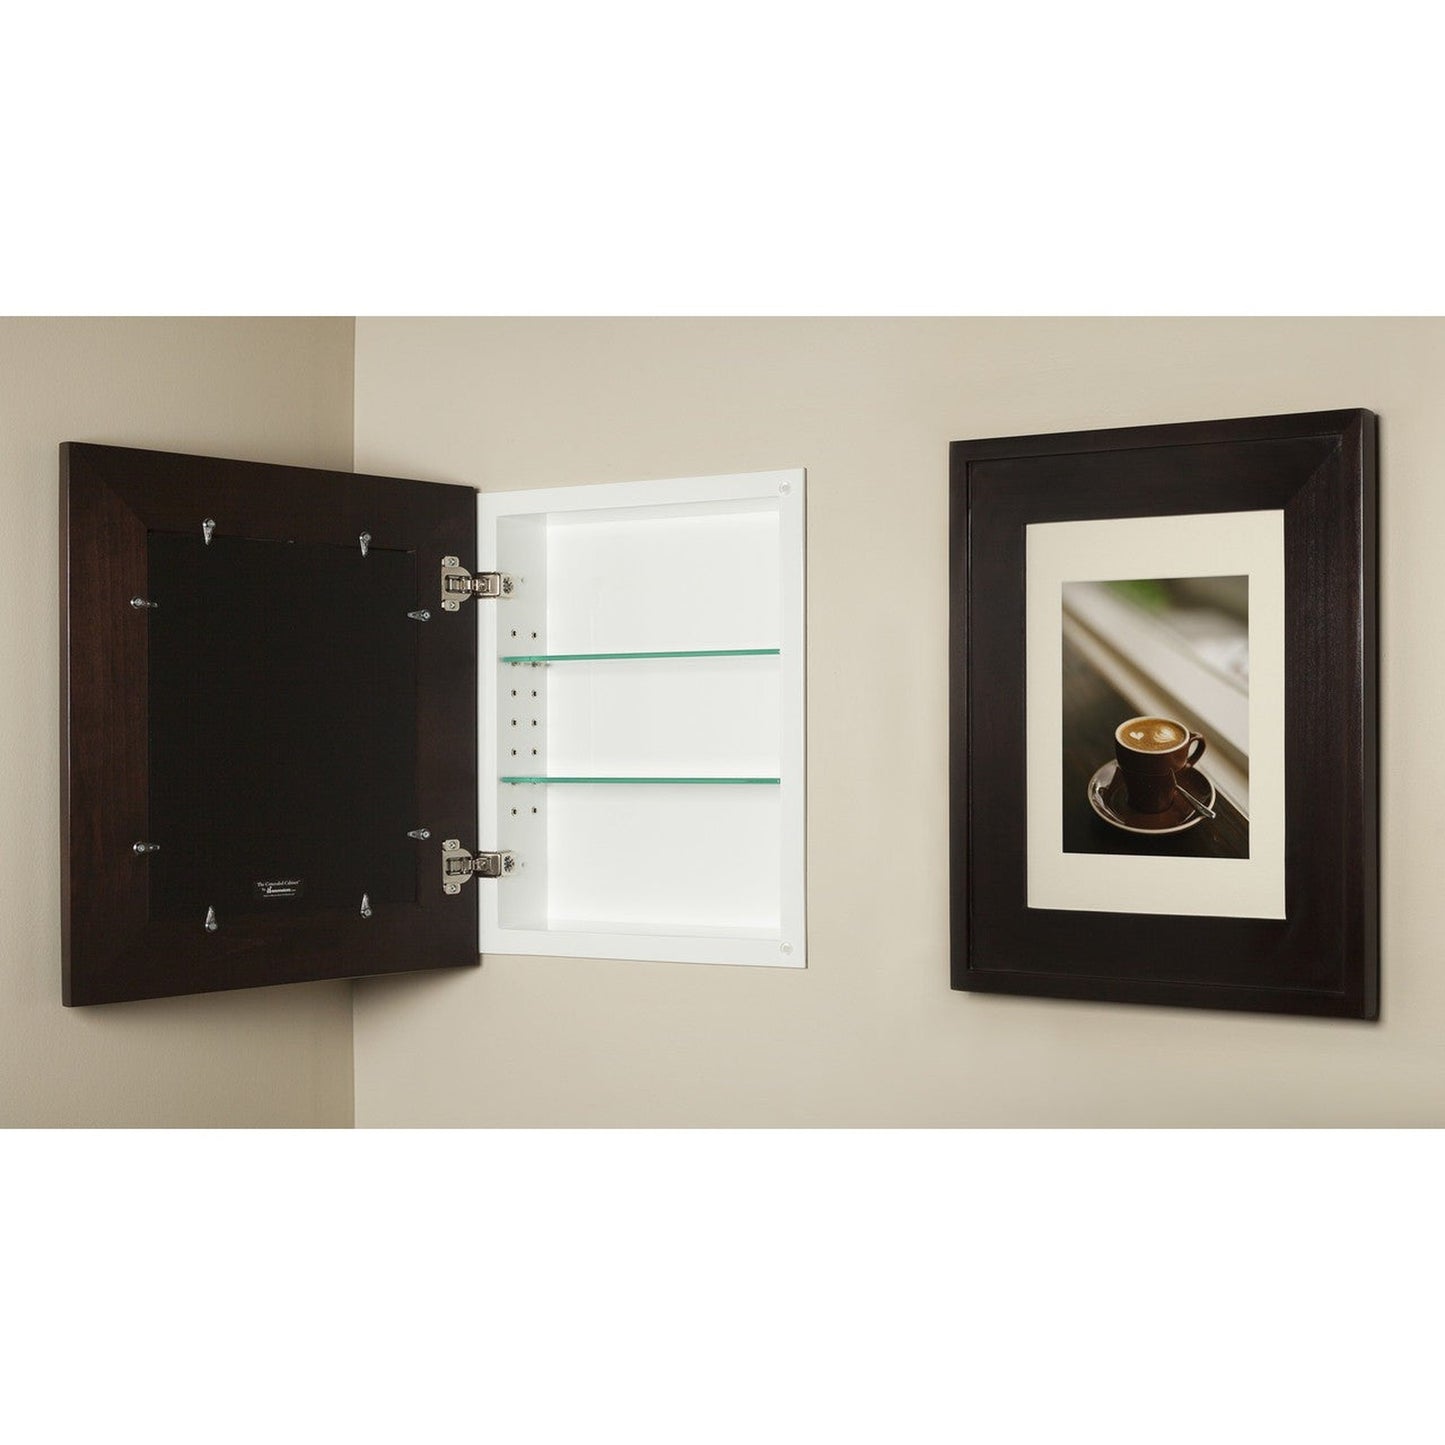 Fox Hollow Furnishings 14" x 16" Coffee Bean Regular Standard 4" Depth Recessed Picture Frame Medicine Cabinet With White 8" x 10" Matting